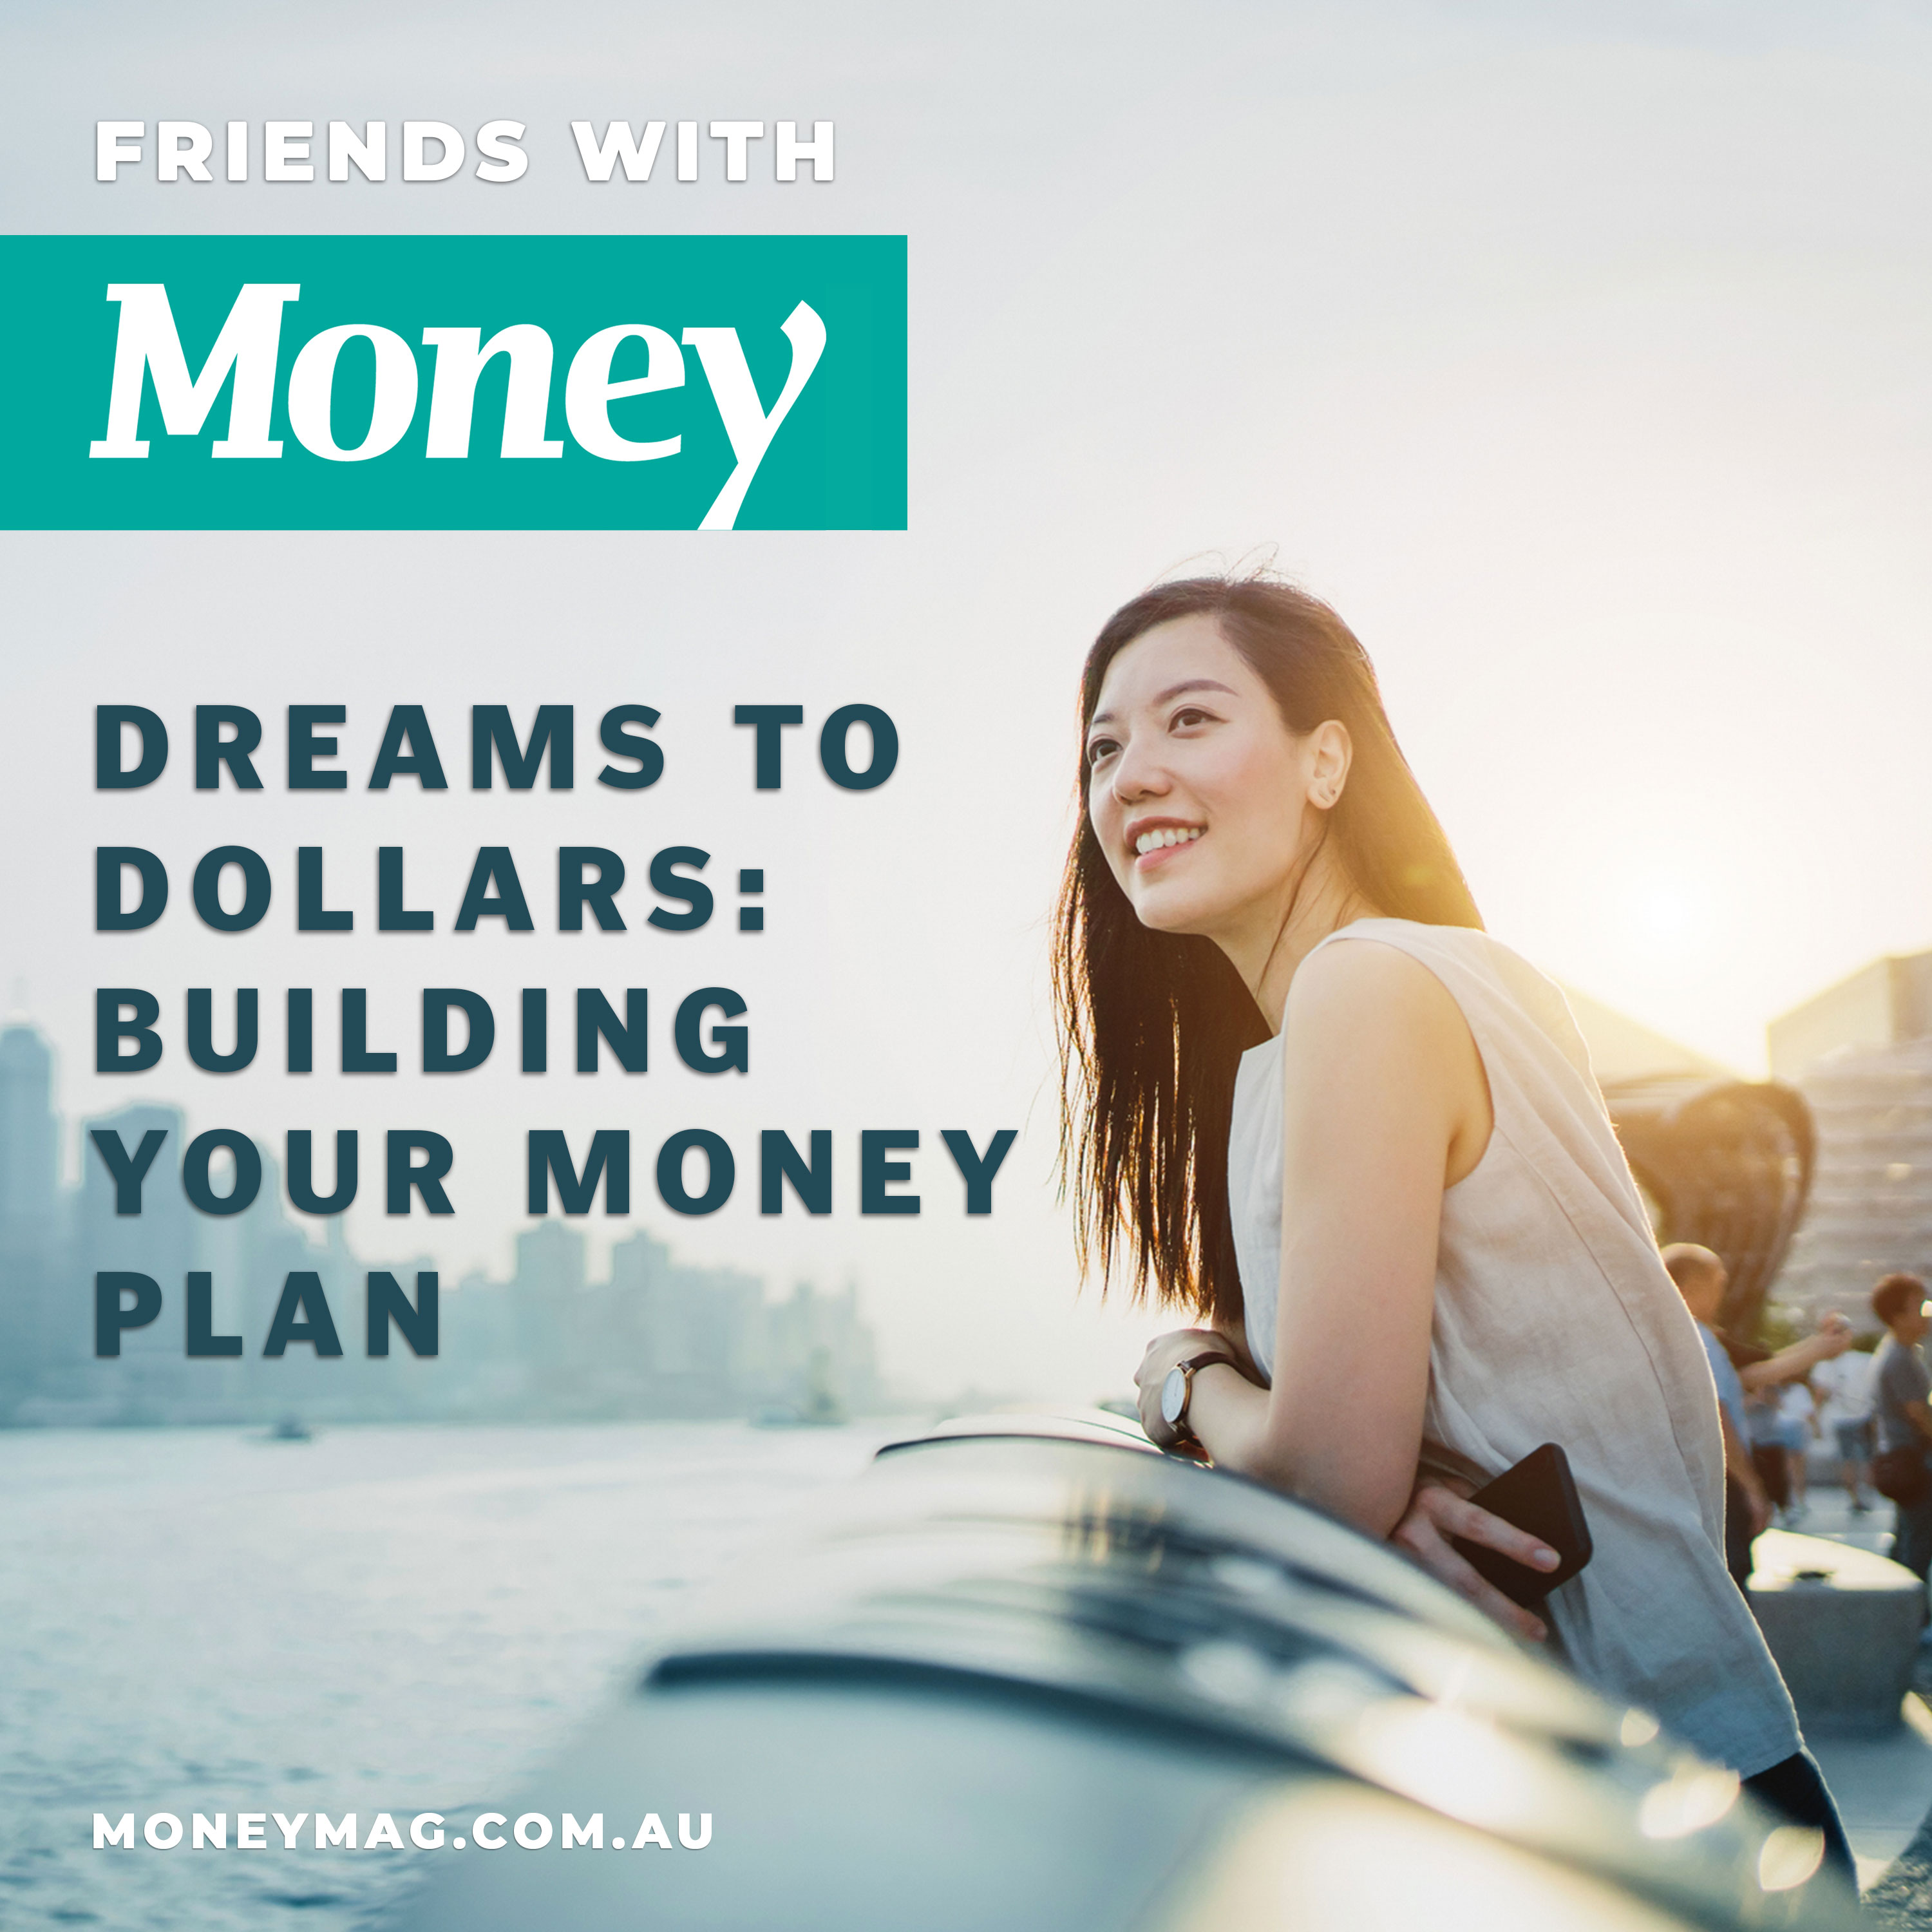 Dreams to dollars: Building your money plan